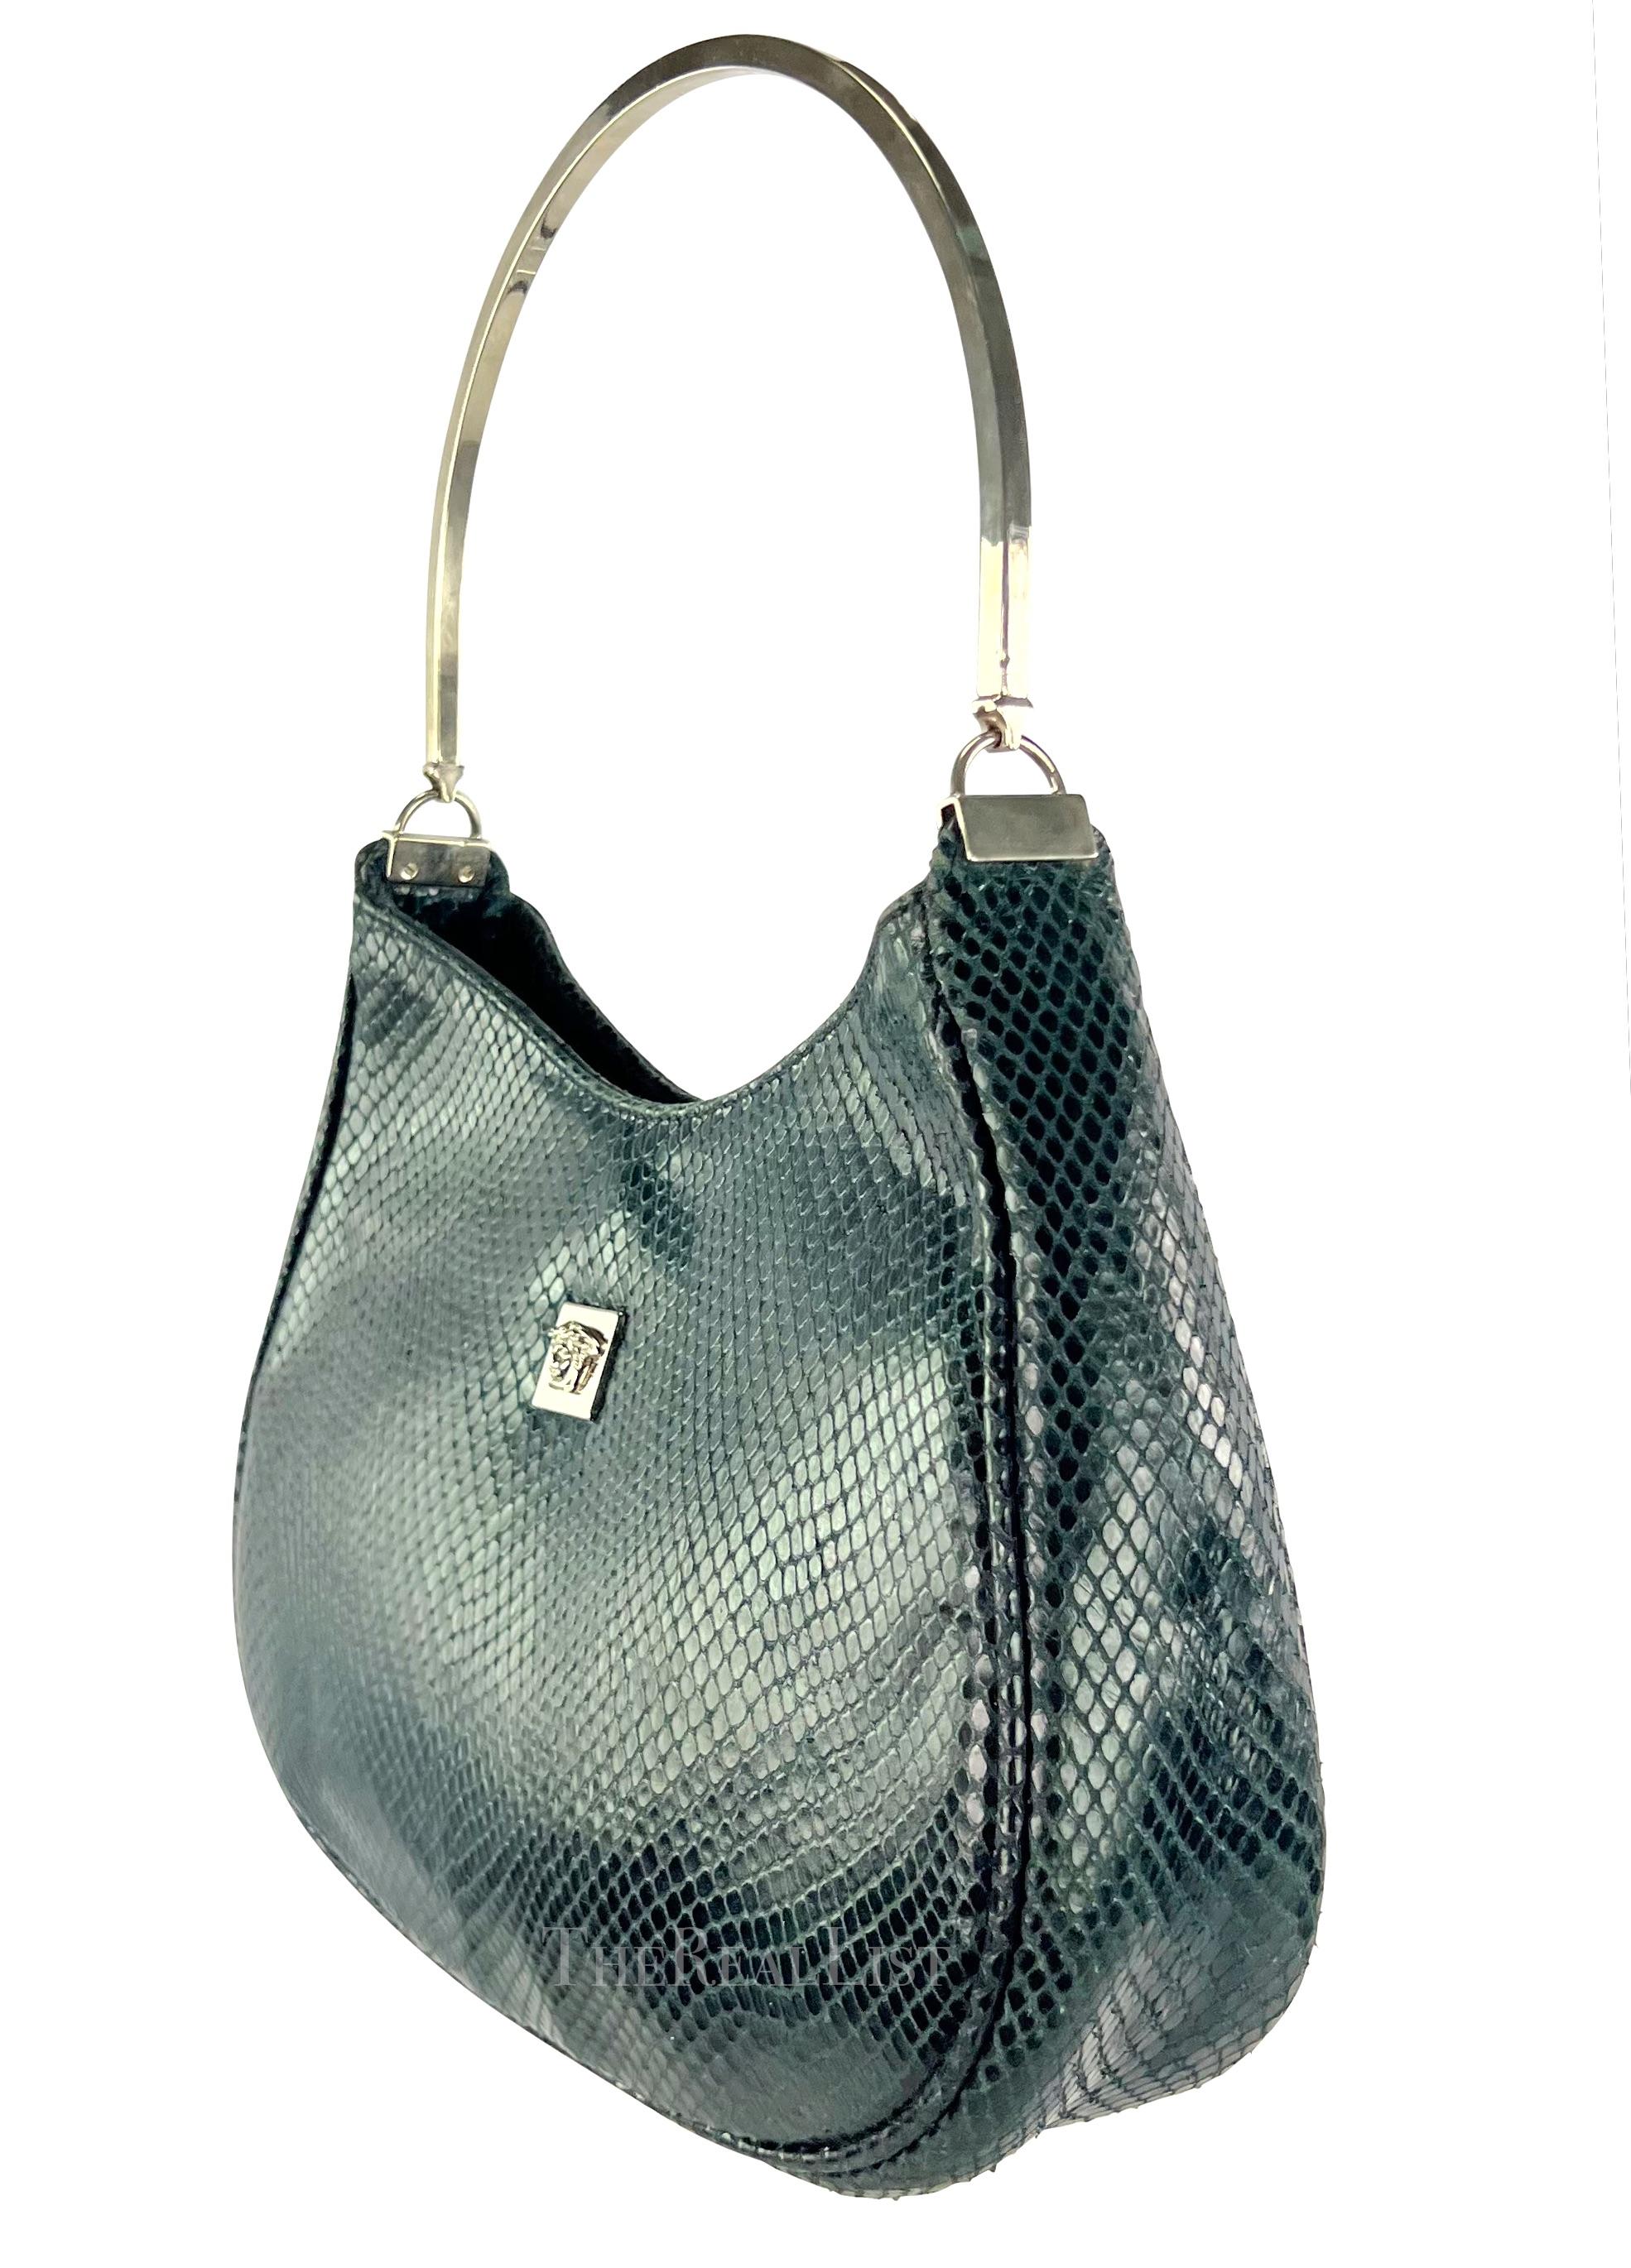 Presenting a gorgeous teal snake skin Gianni Versace. From the 1990s, this bag showcases an exquisite teal snakeskin construction. Its round silver-tone metal handle and the captivating medusa relief on the front make a bold statement. Elevate your